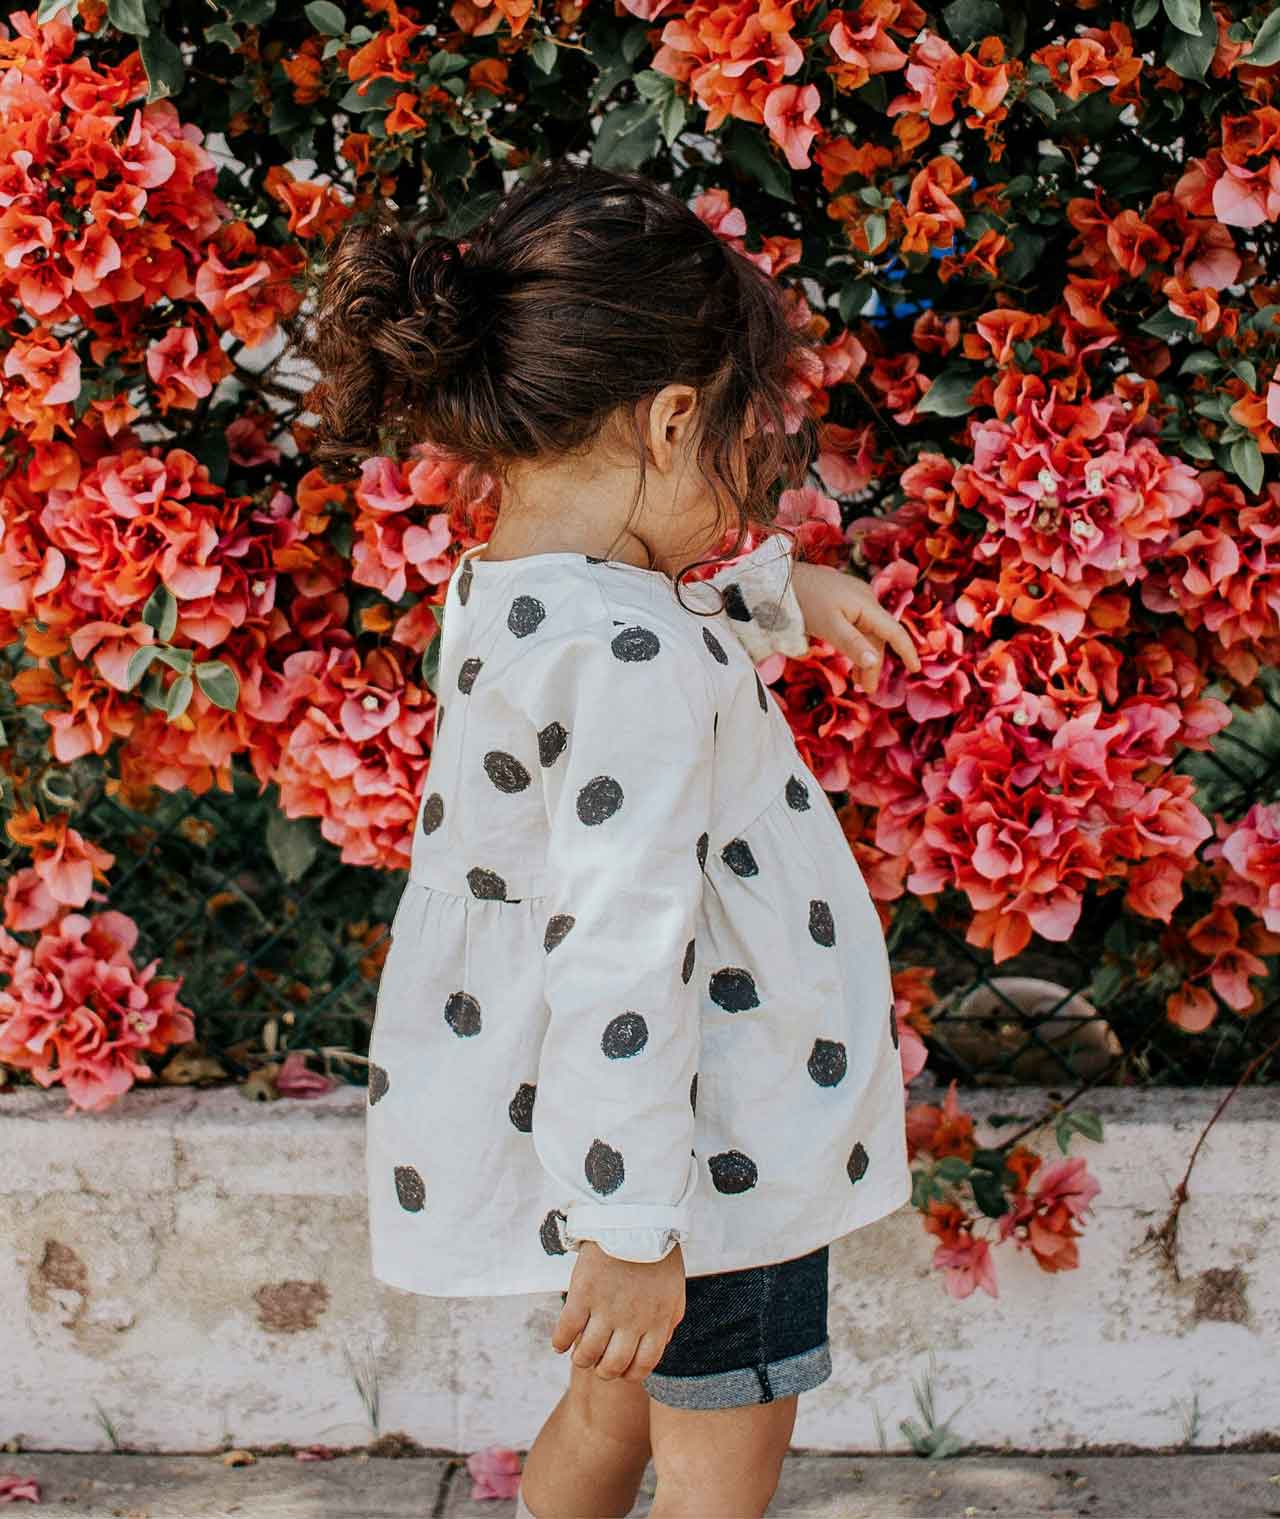 young girl by a wall of roses